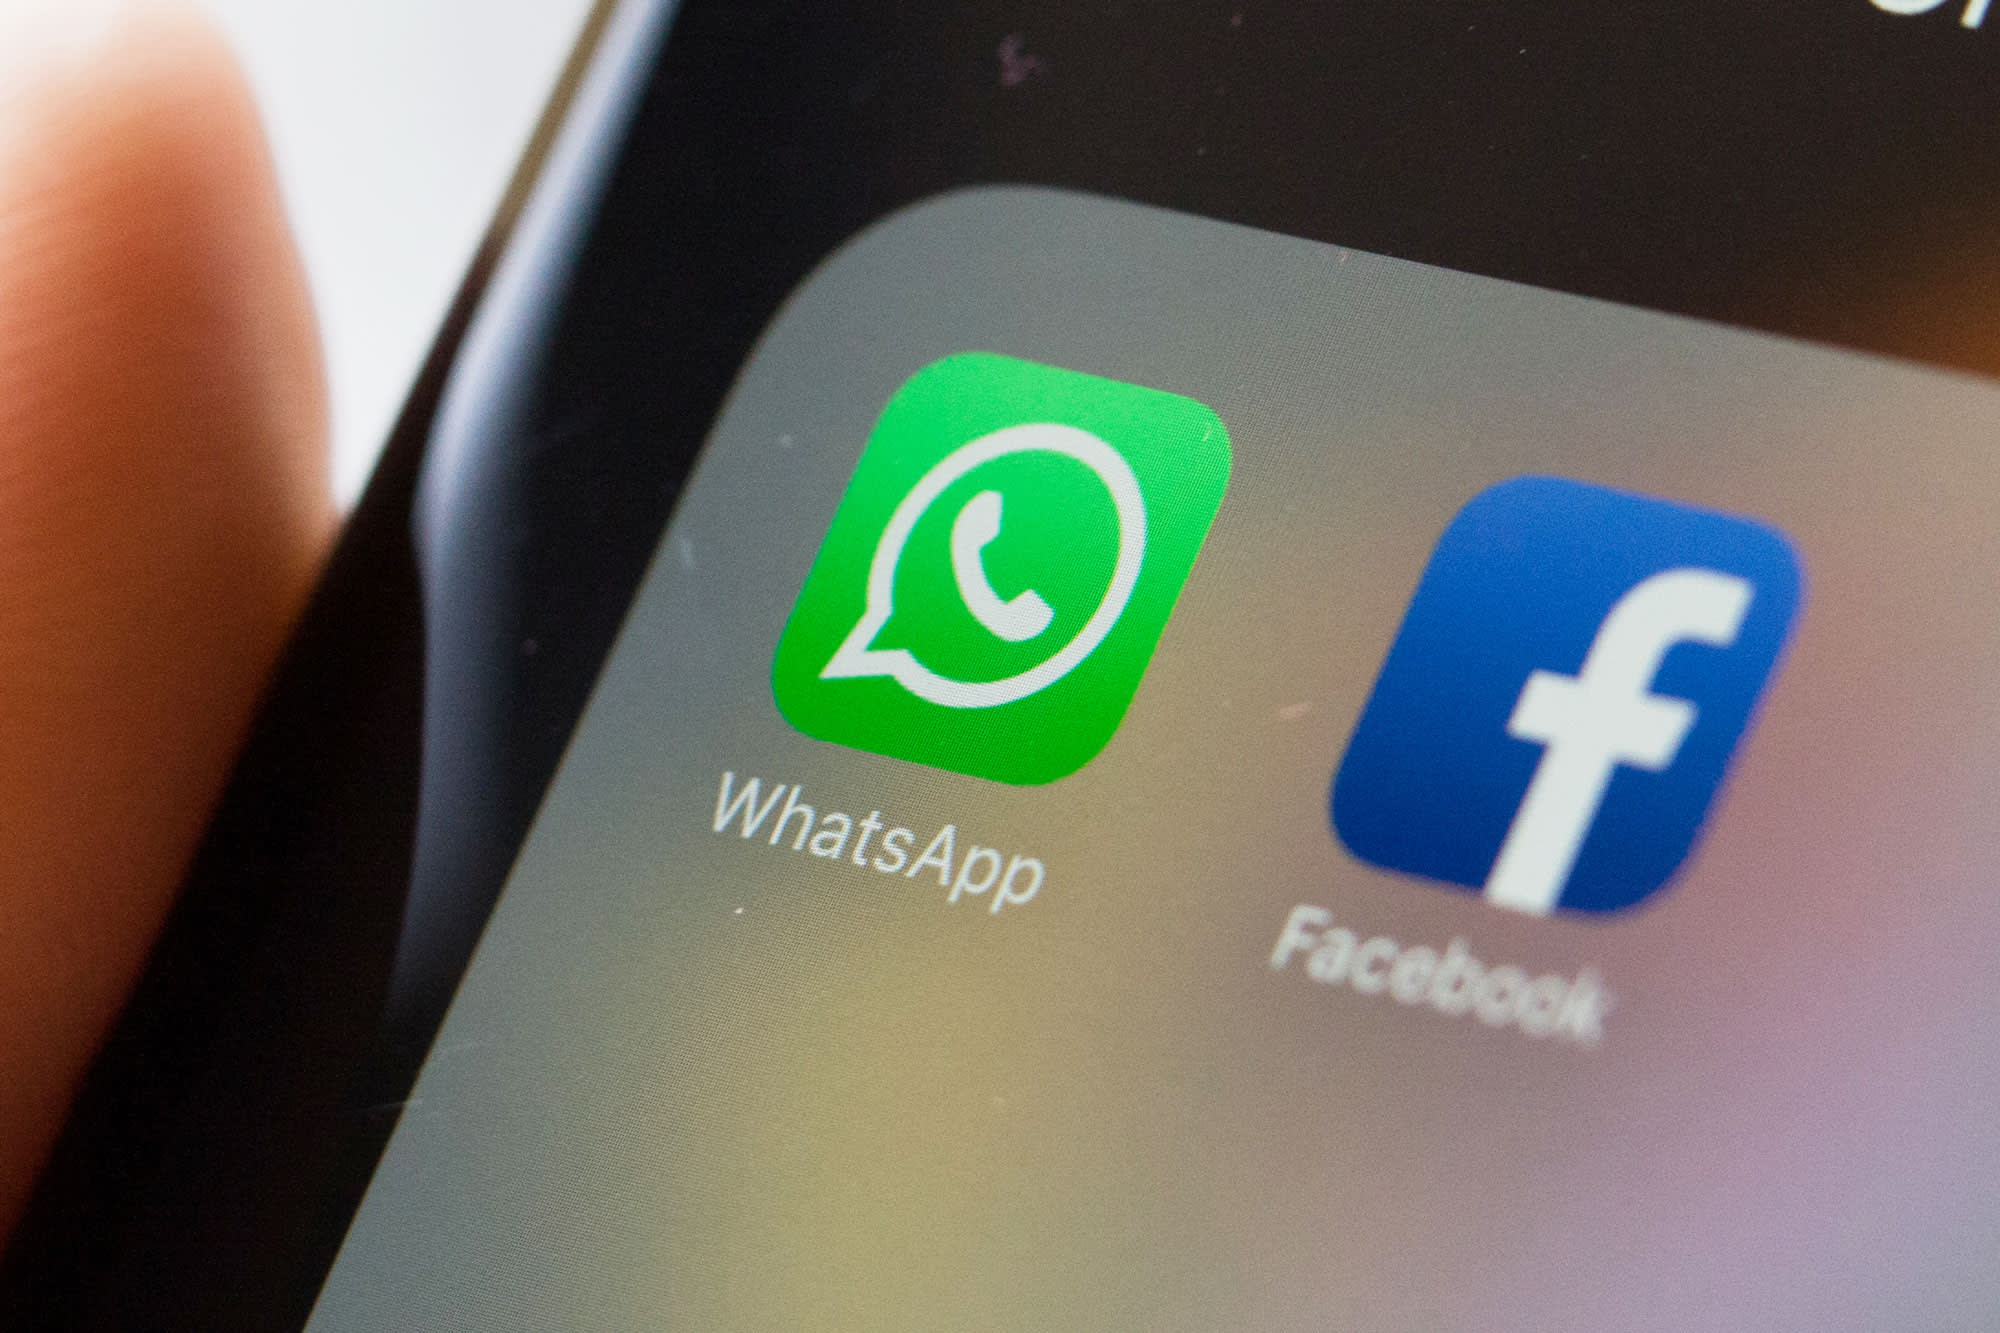 WhatsApp delays privacy update amid 'confusion' with Facebook data sharing